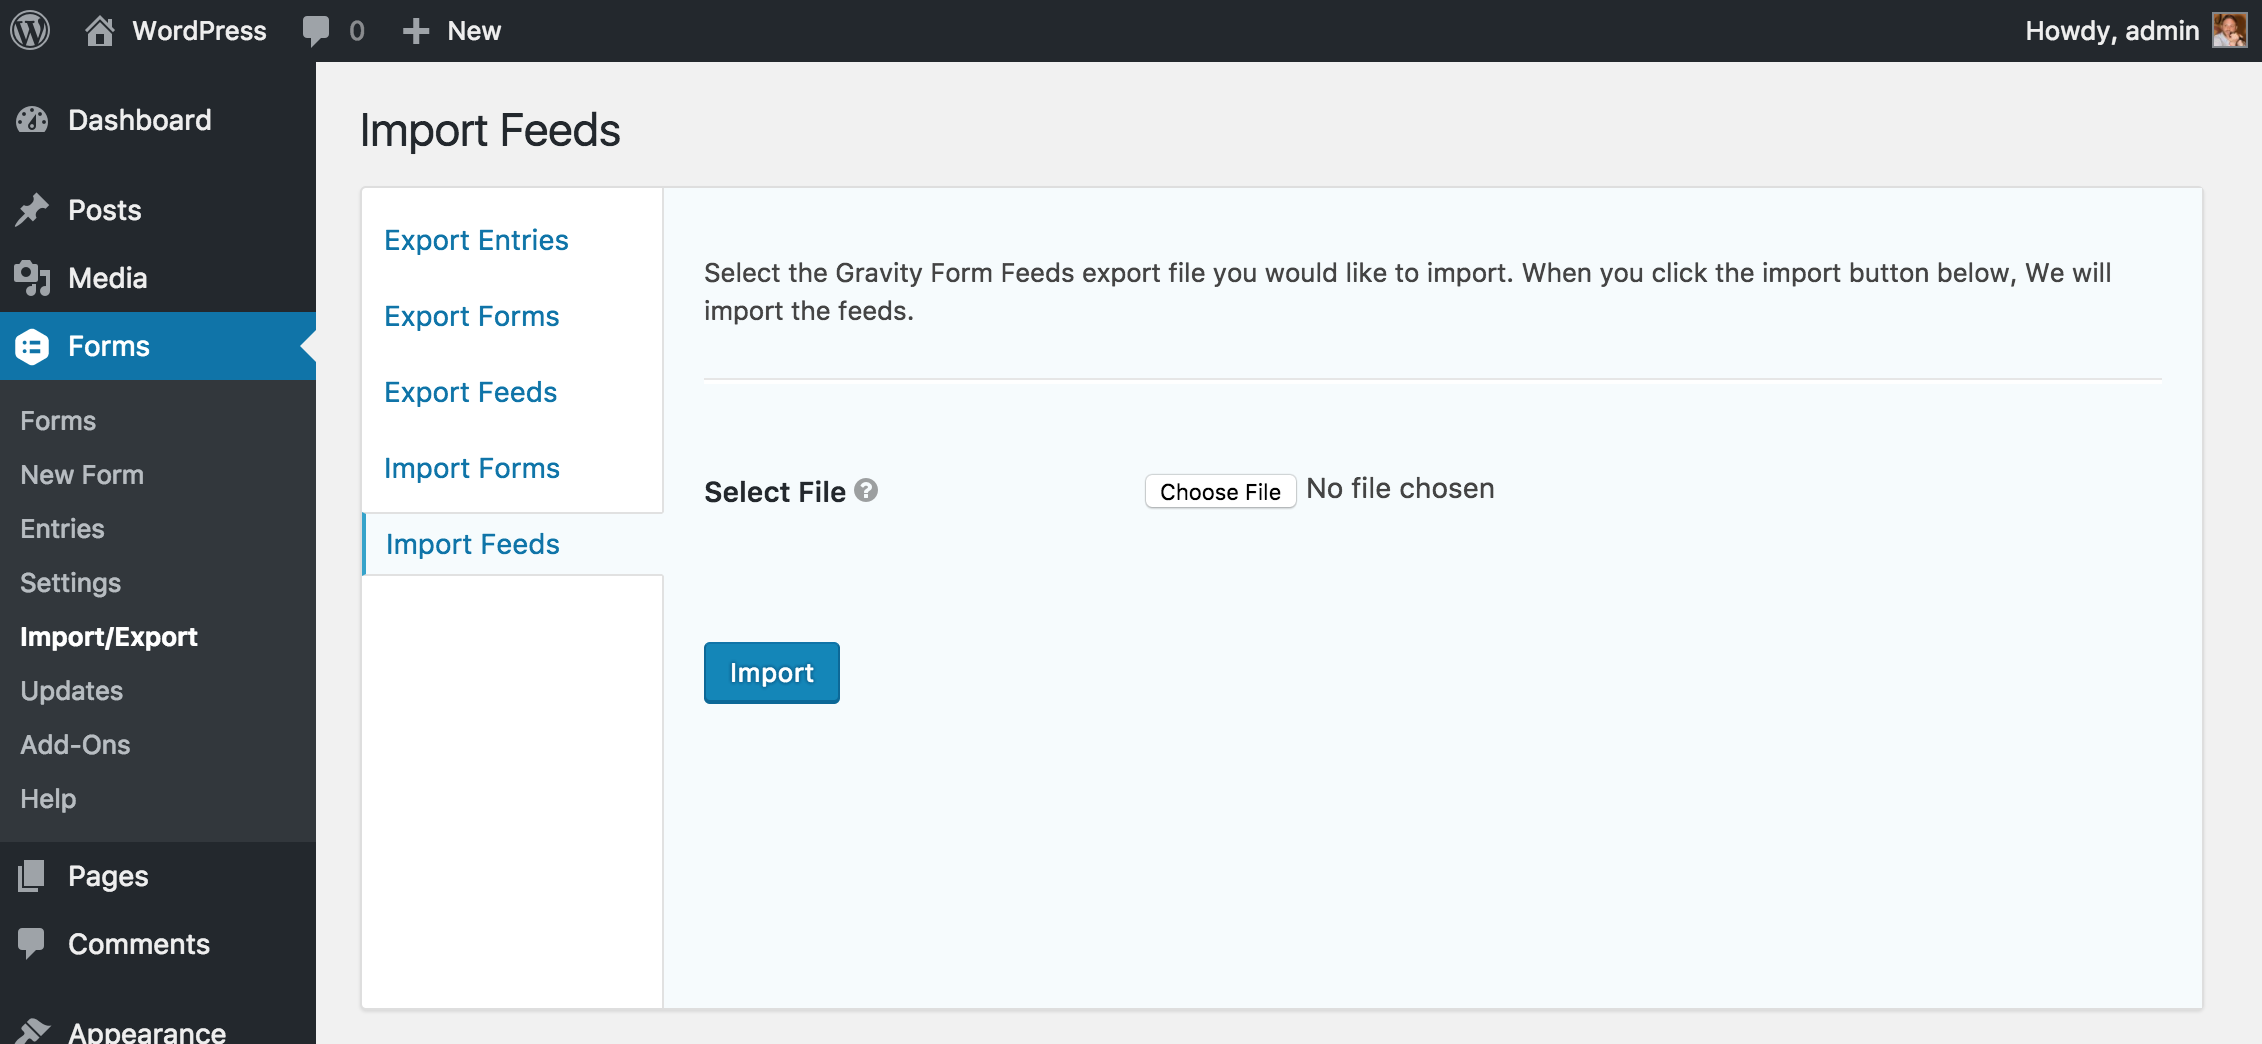 This screen shot shows you how to import feeds.